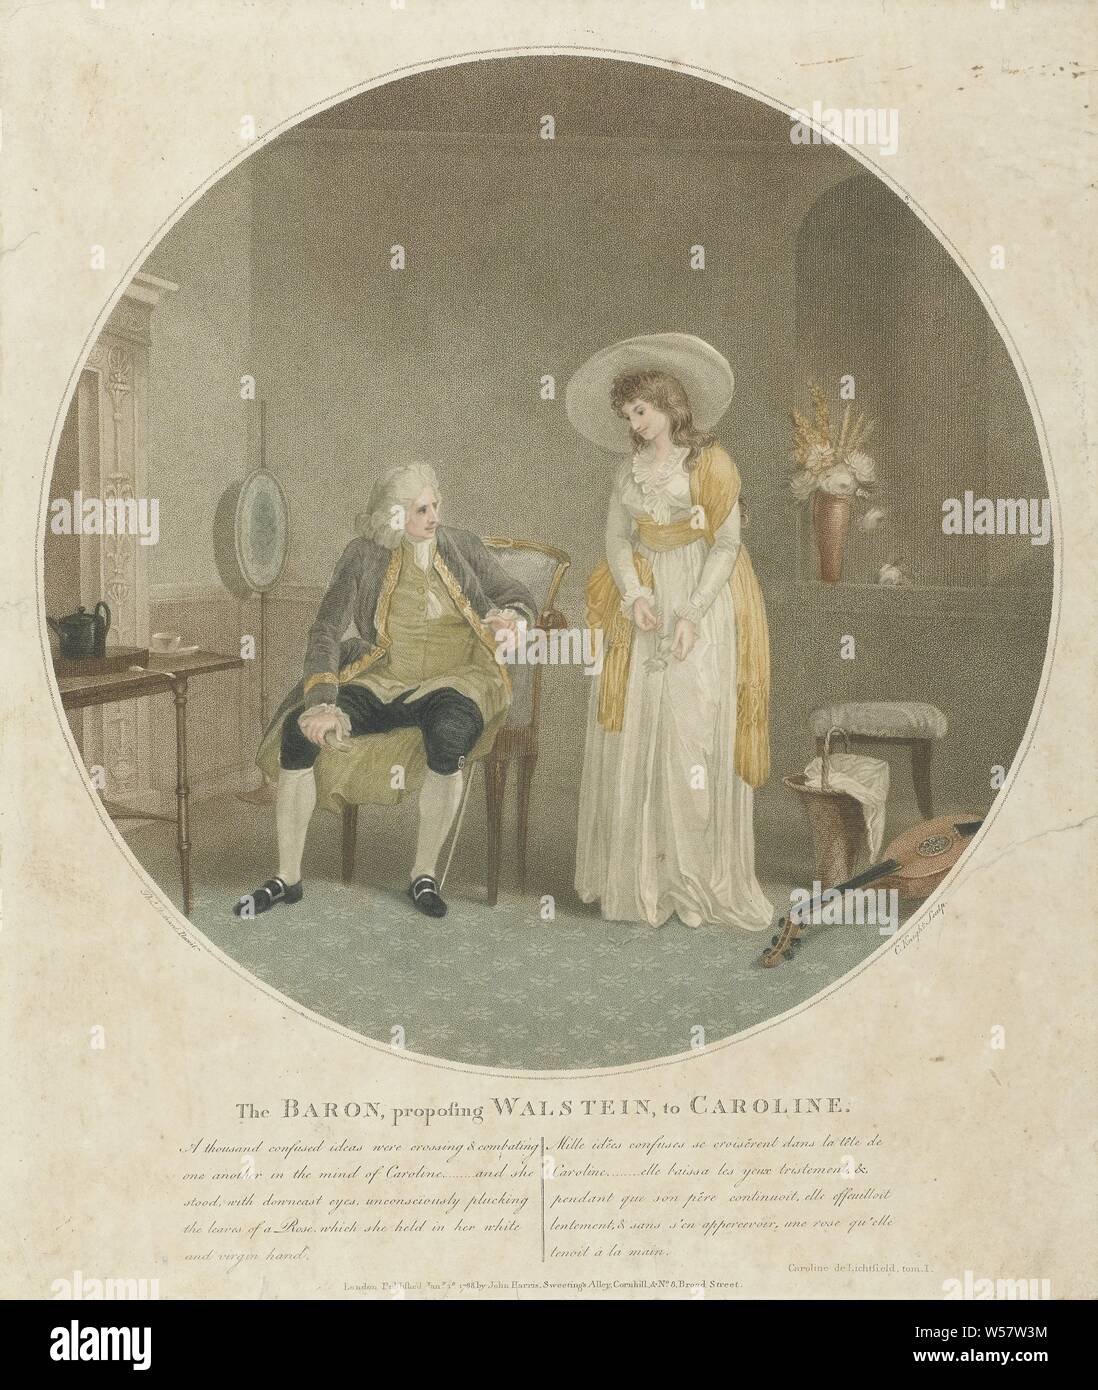 The Baron proposing Walstein to Carolina to Th. Stothard, Charles Knight, London, 1753 - 1830, paper Stock Photo